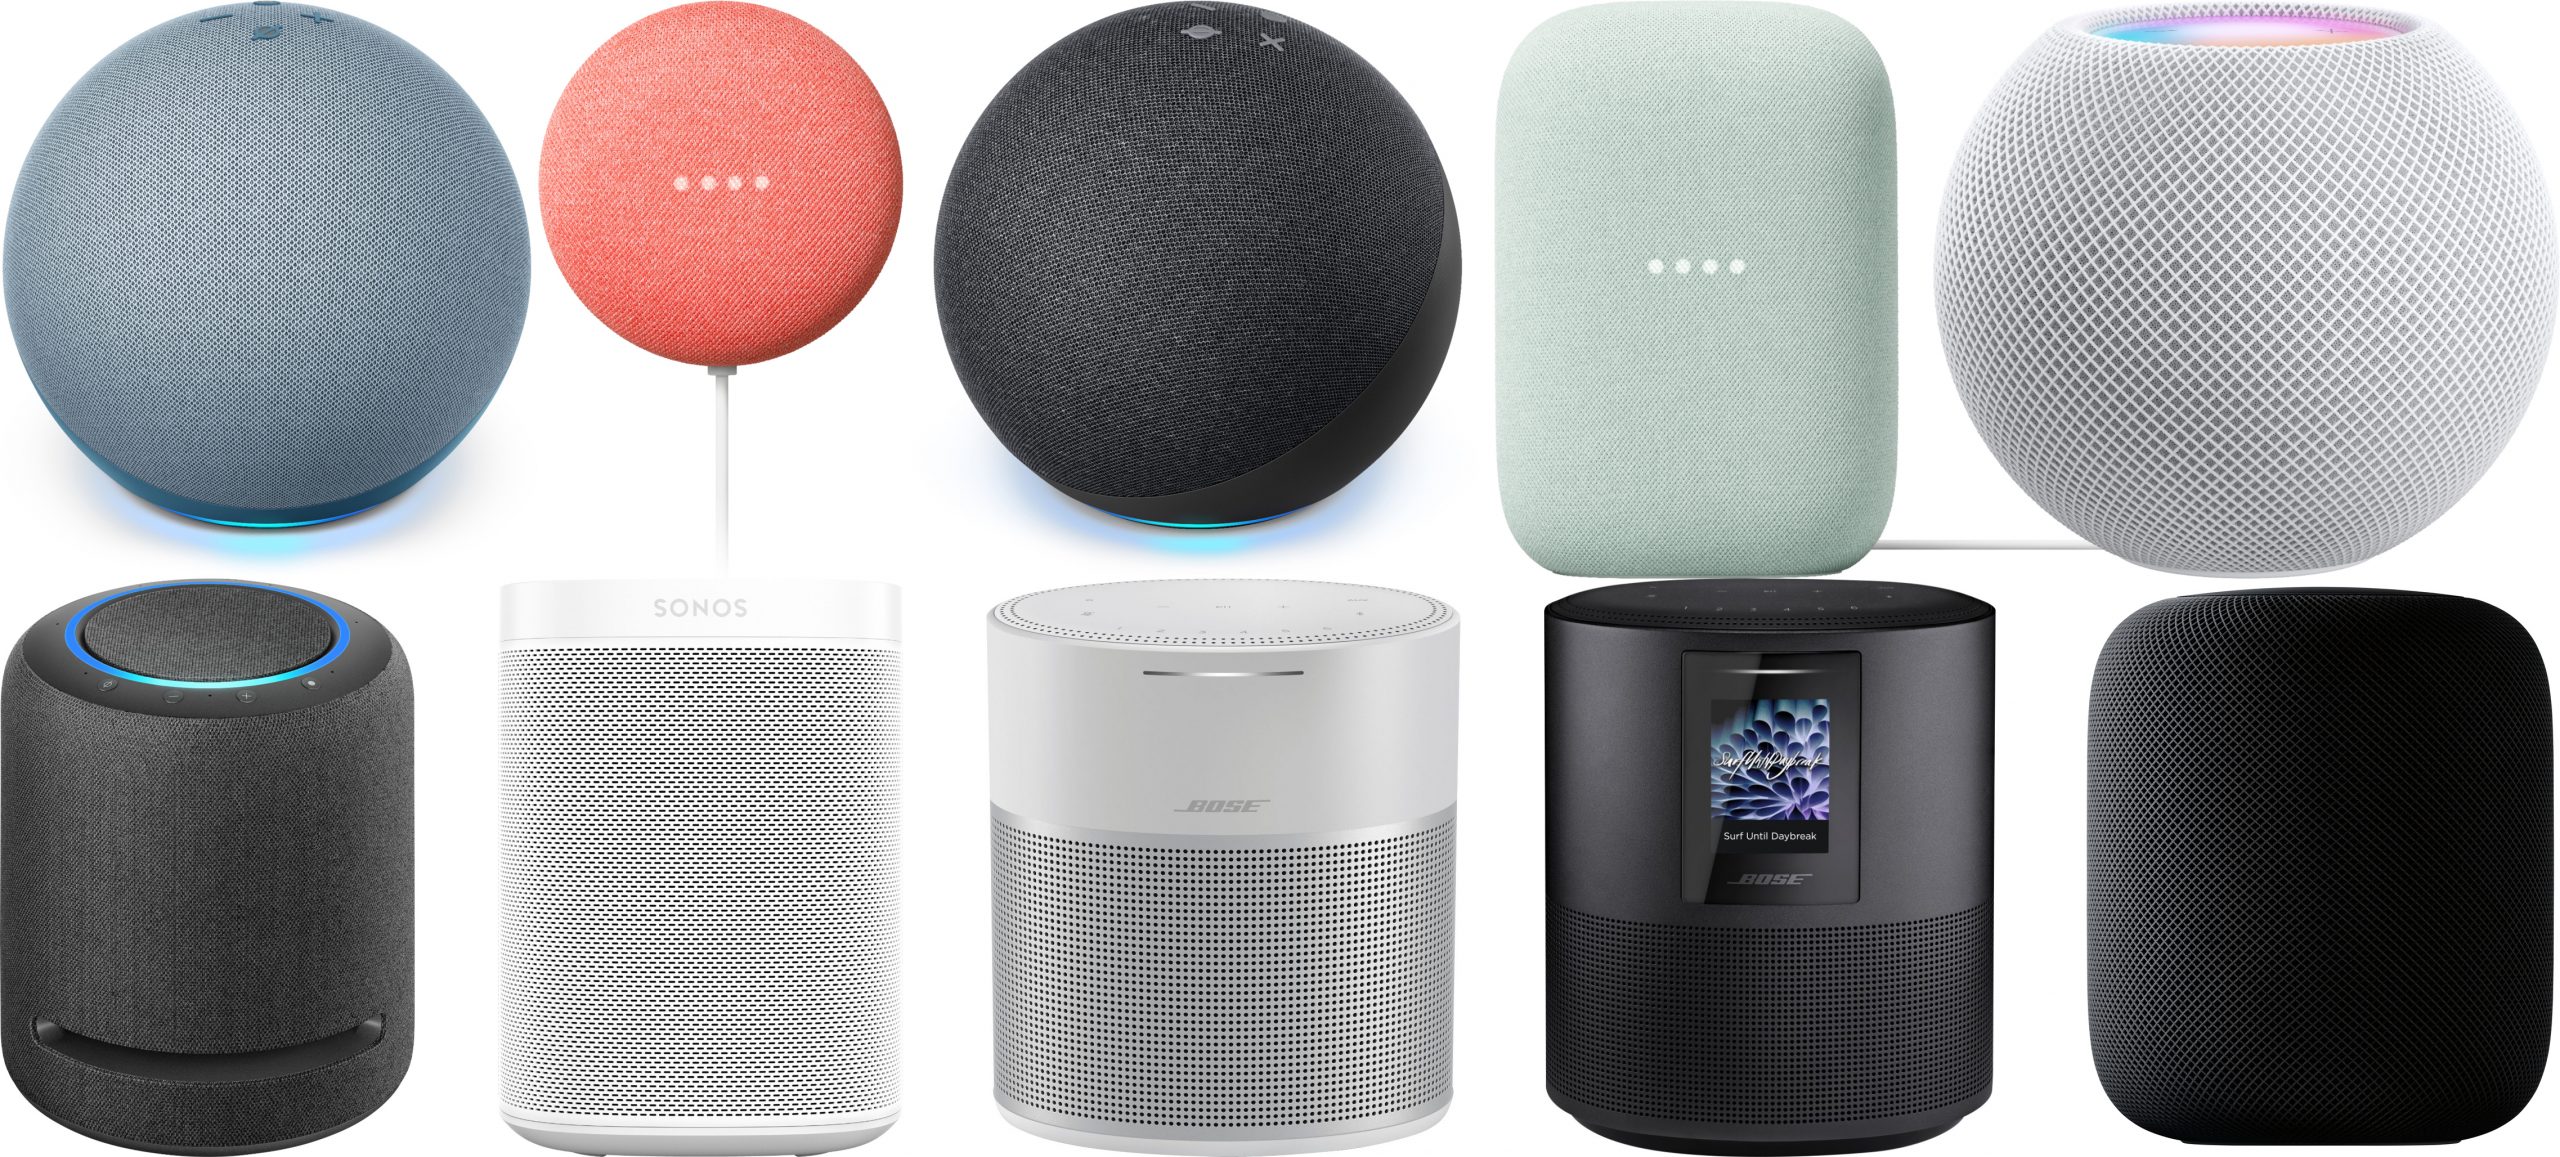 Motivering Twisted Mangler The best home smart speakers at every price point in 2021 - Amazon Alexa,  Google Assistant and Apple Siri-enabled - RouteNote Blog